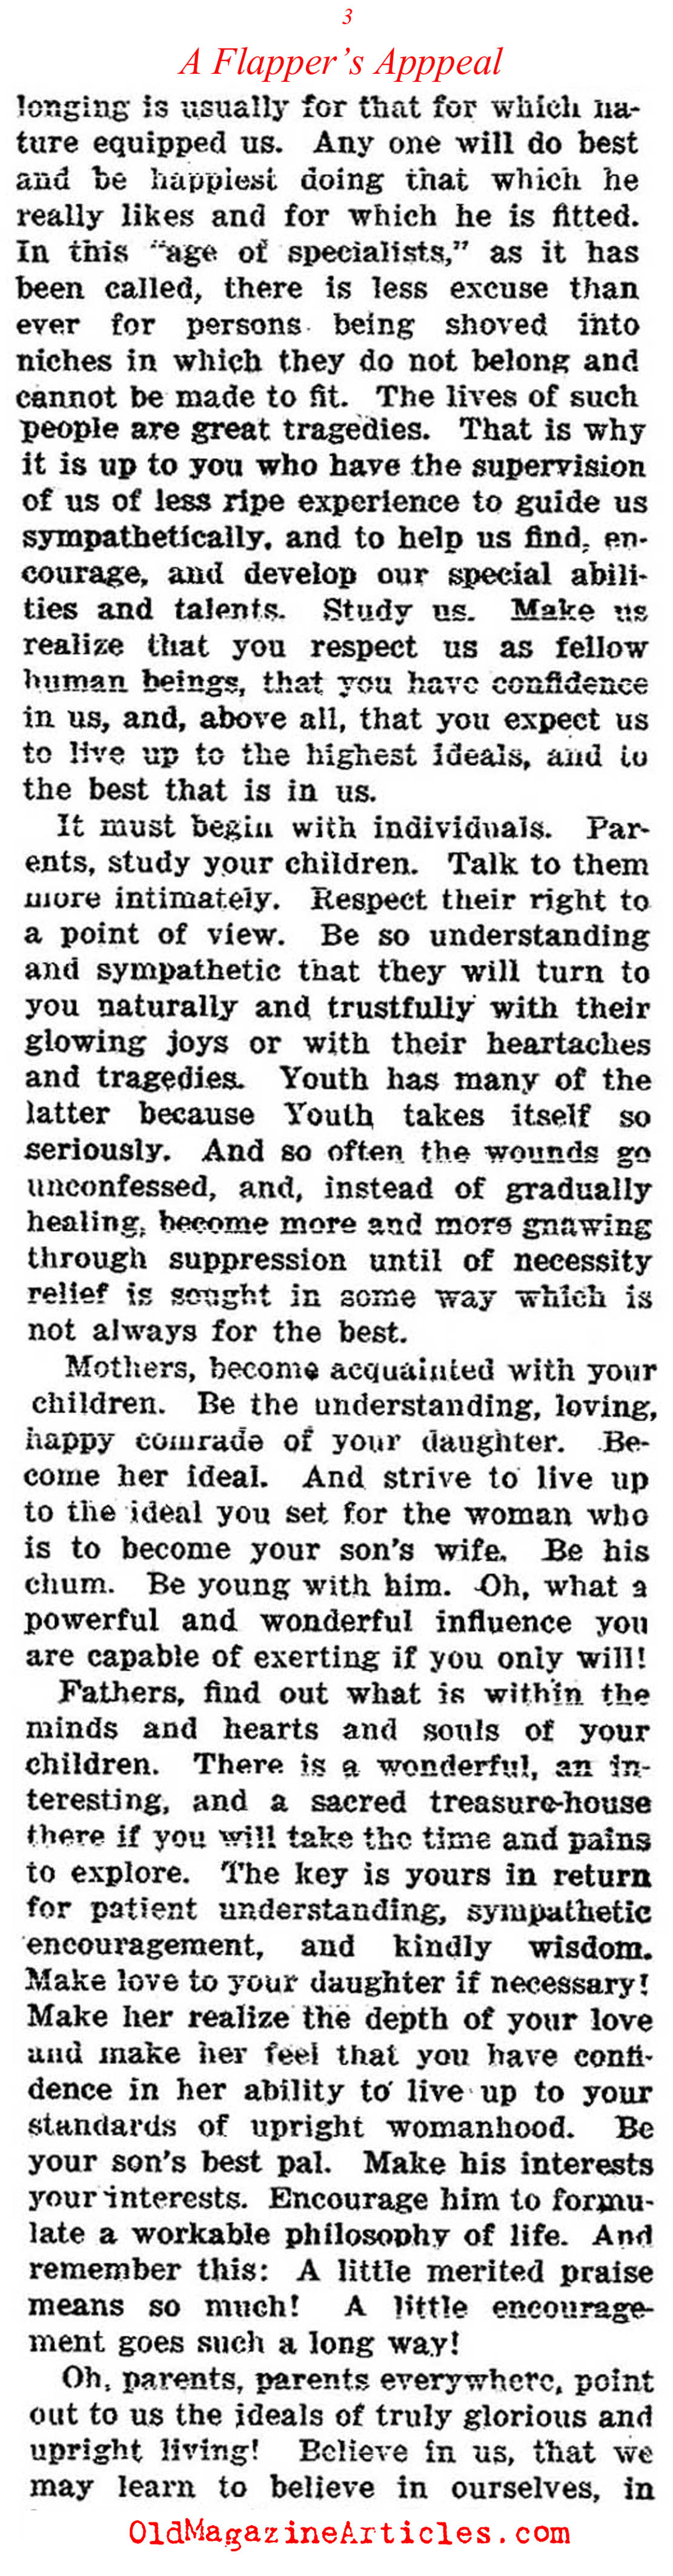 ''A Flapper's Appeal to Parents''  (The Outlook, 1922)